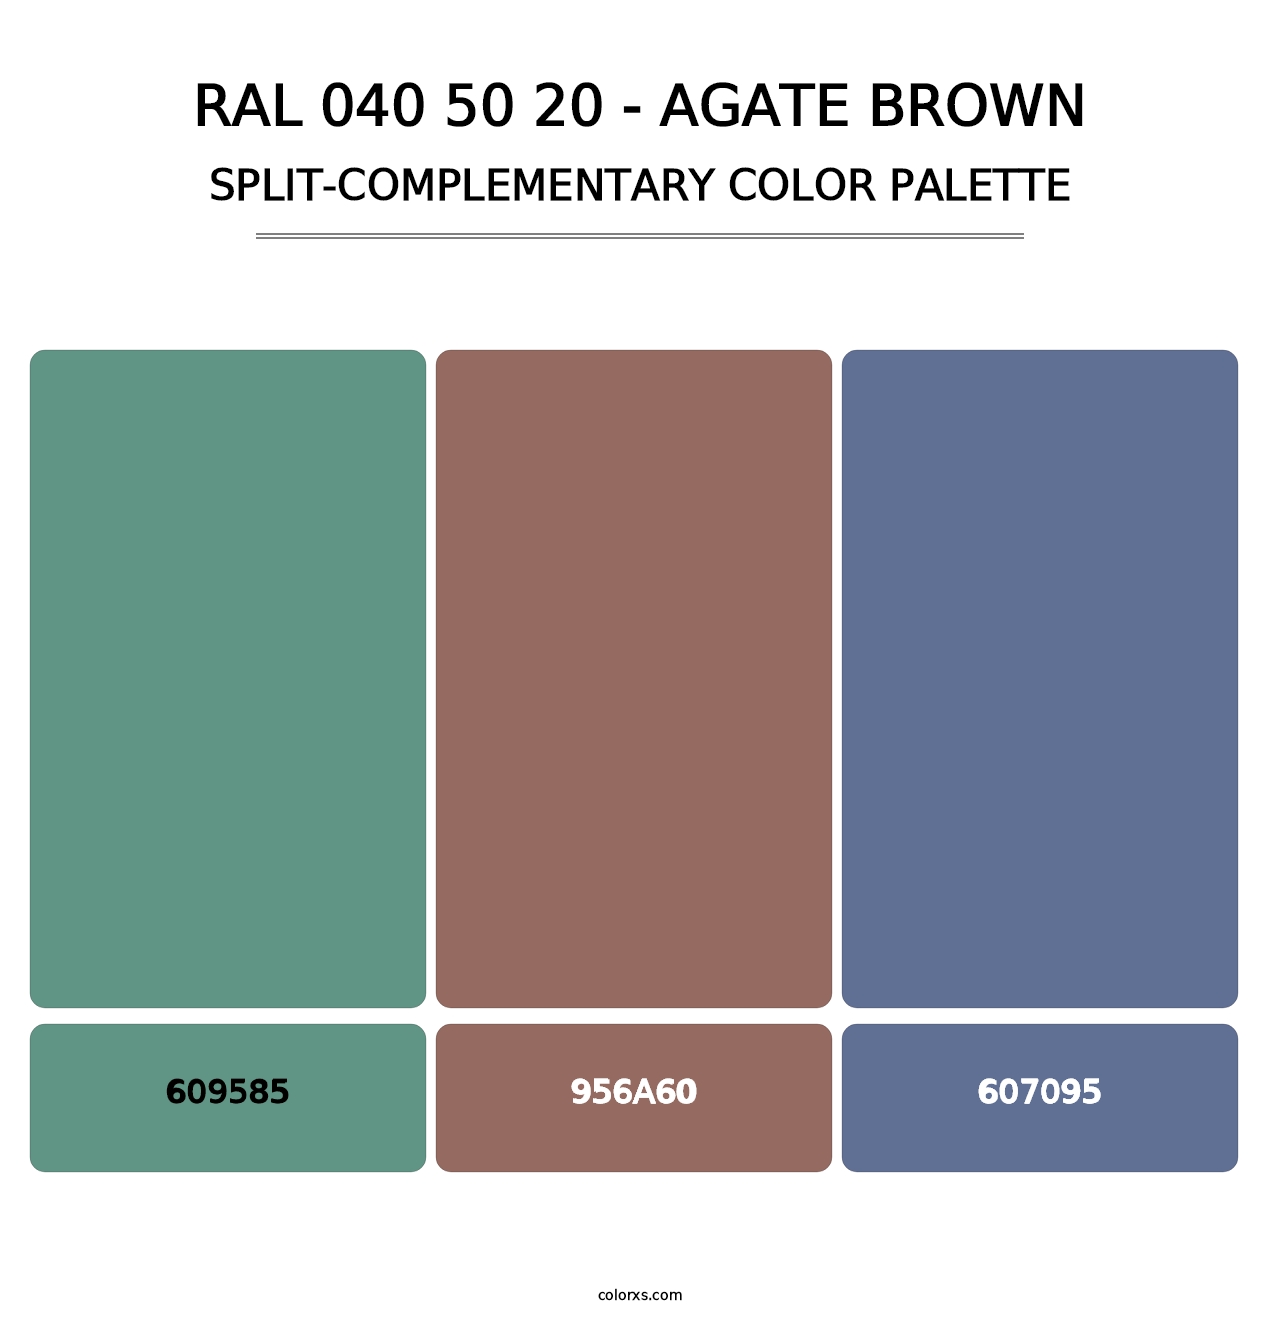 RAL 040 50 20 - Agate Brown - Split-Complementary Color Palette